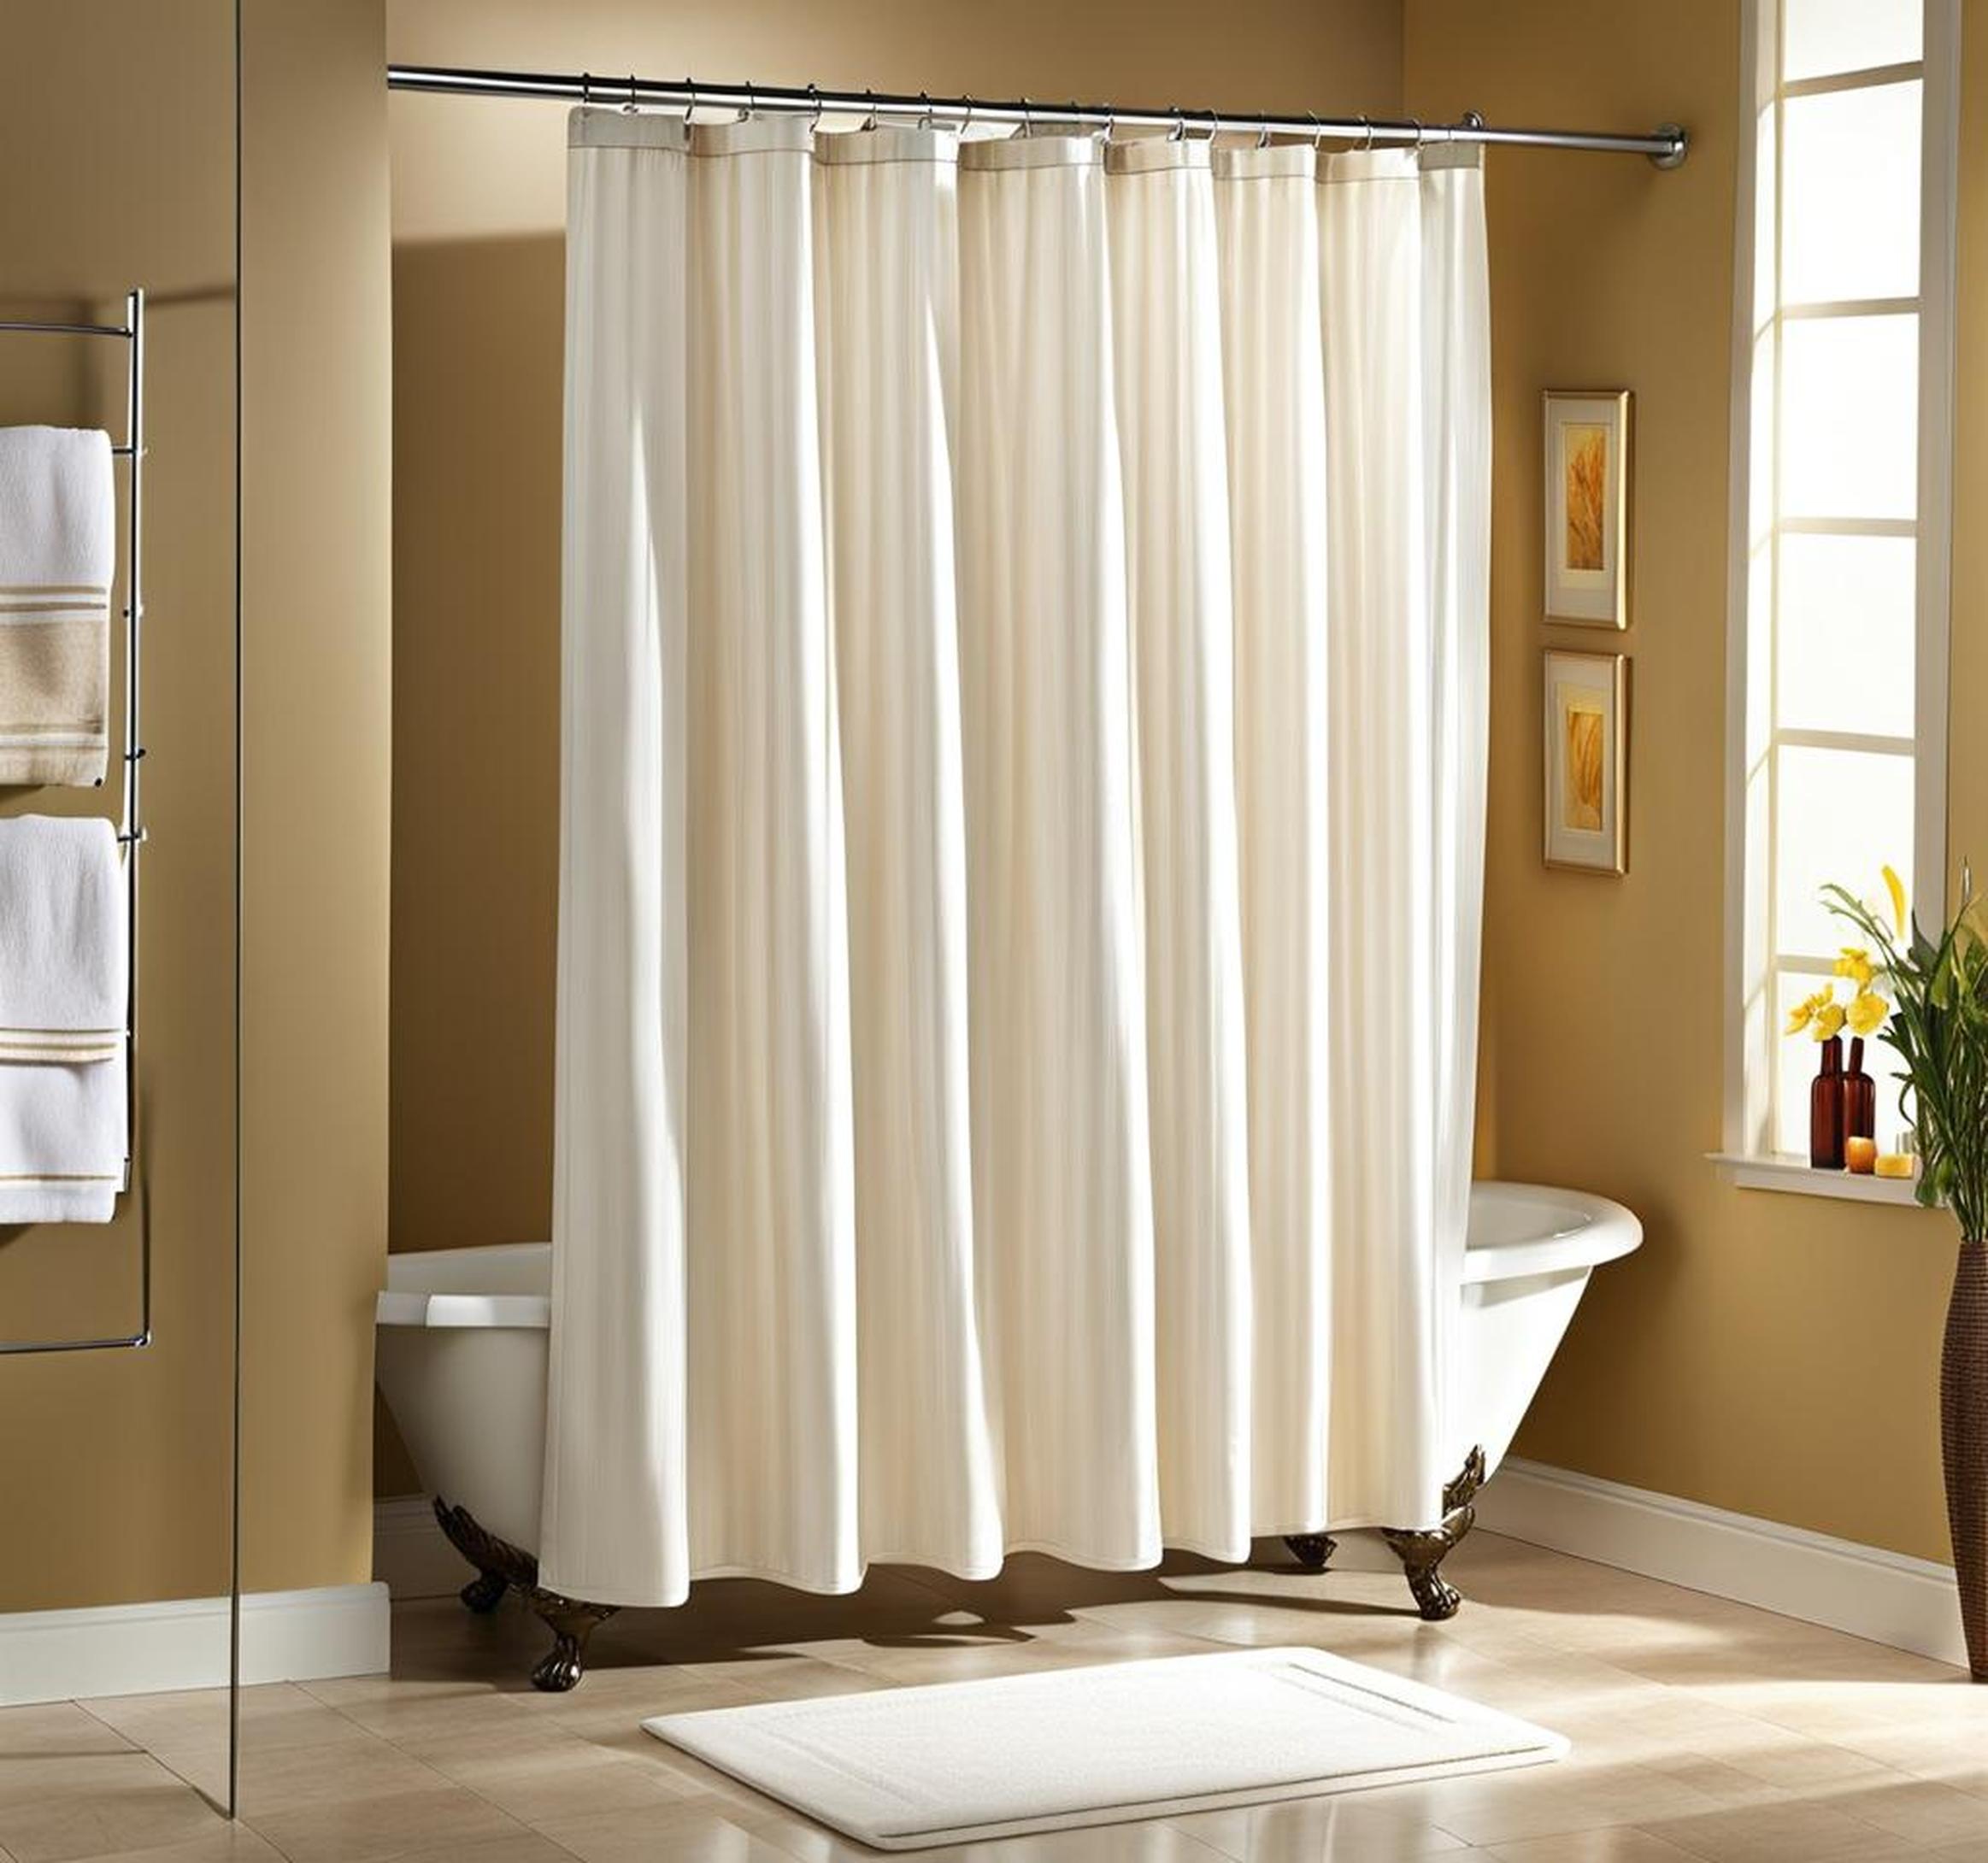 shower stall with curtain instead of door